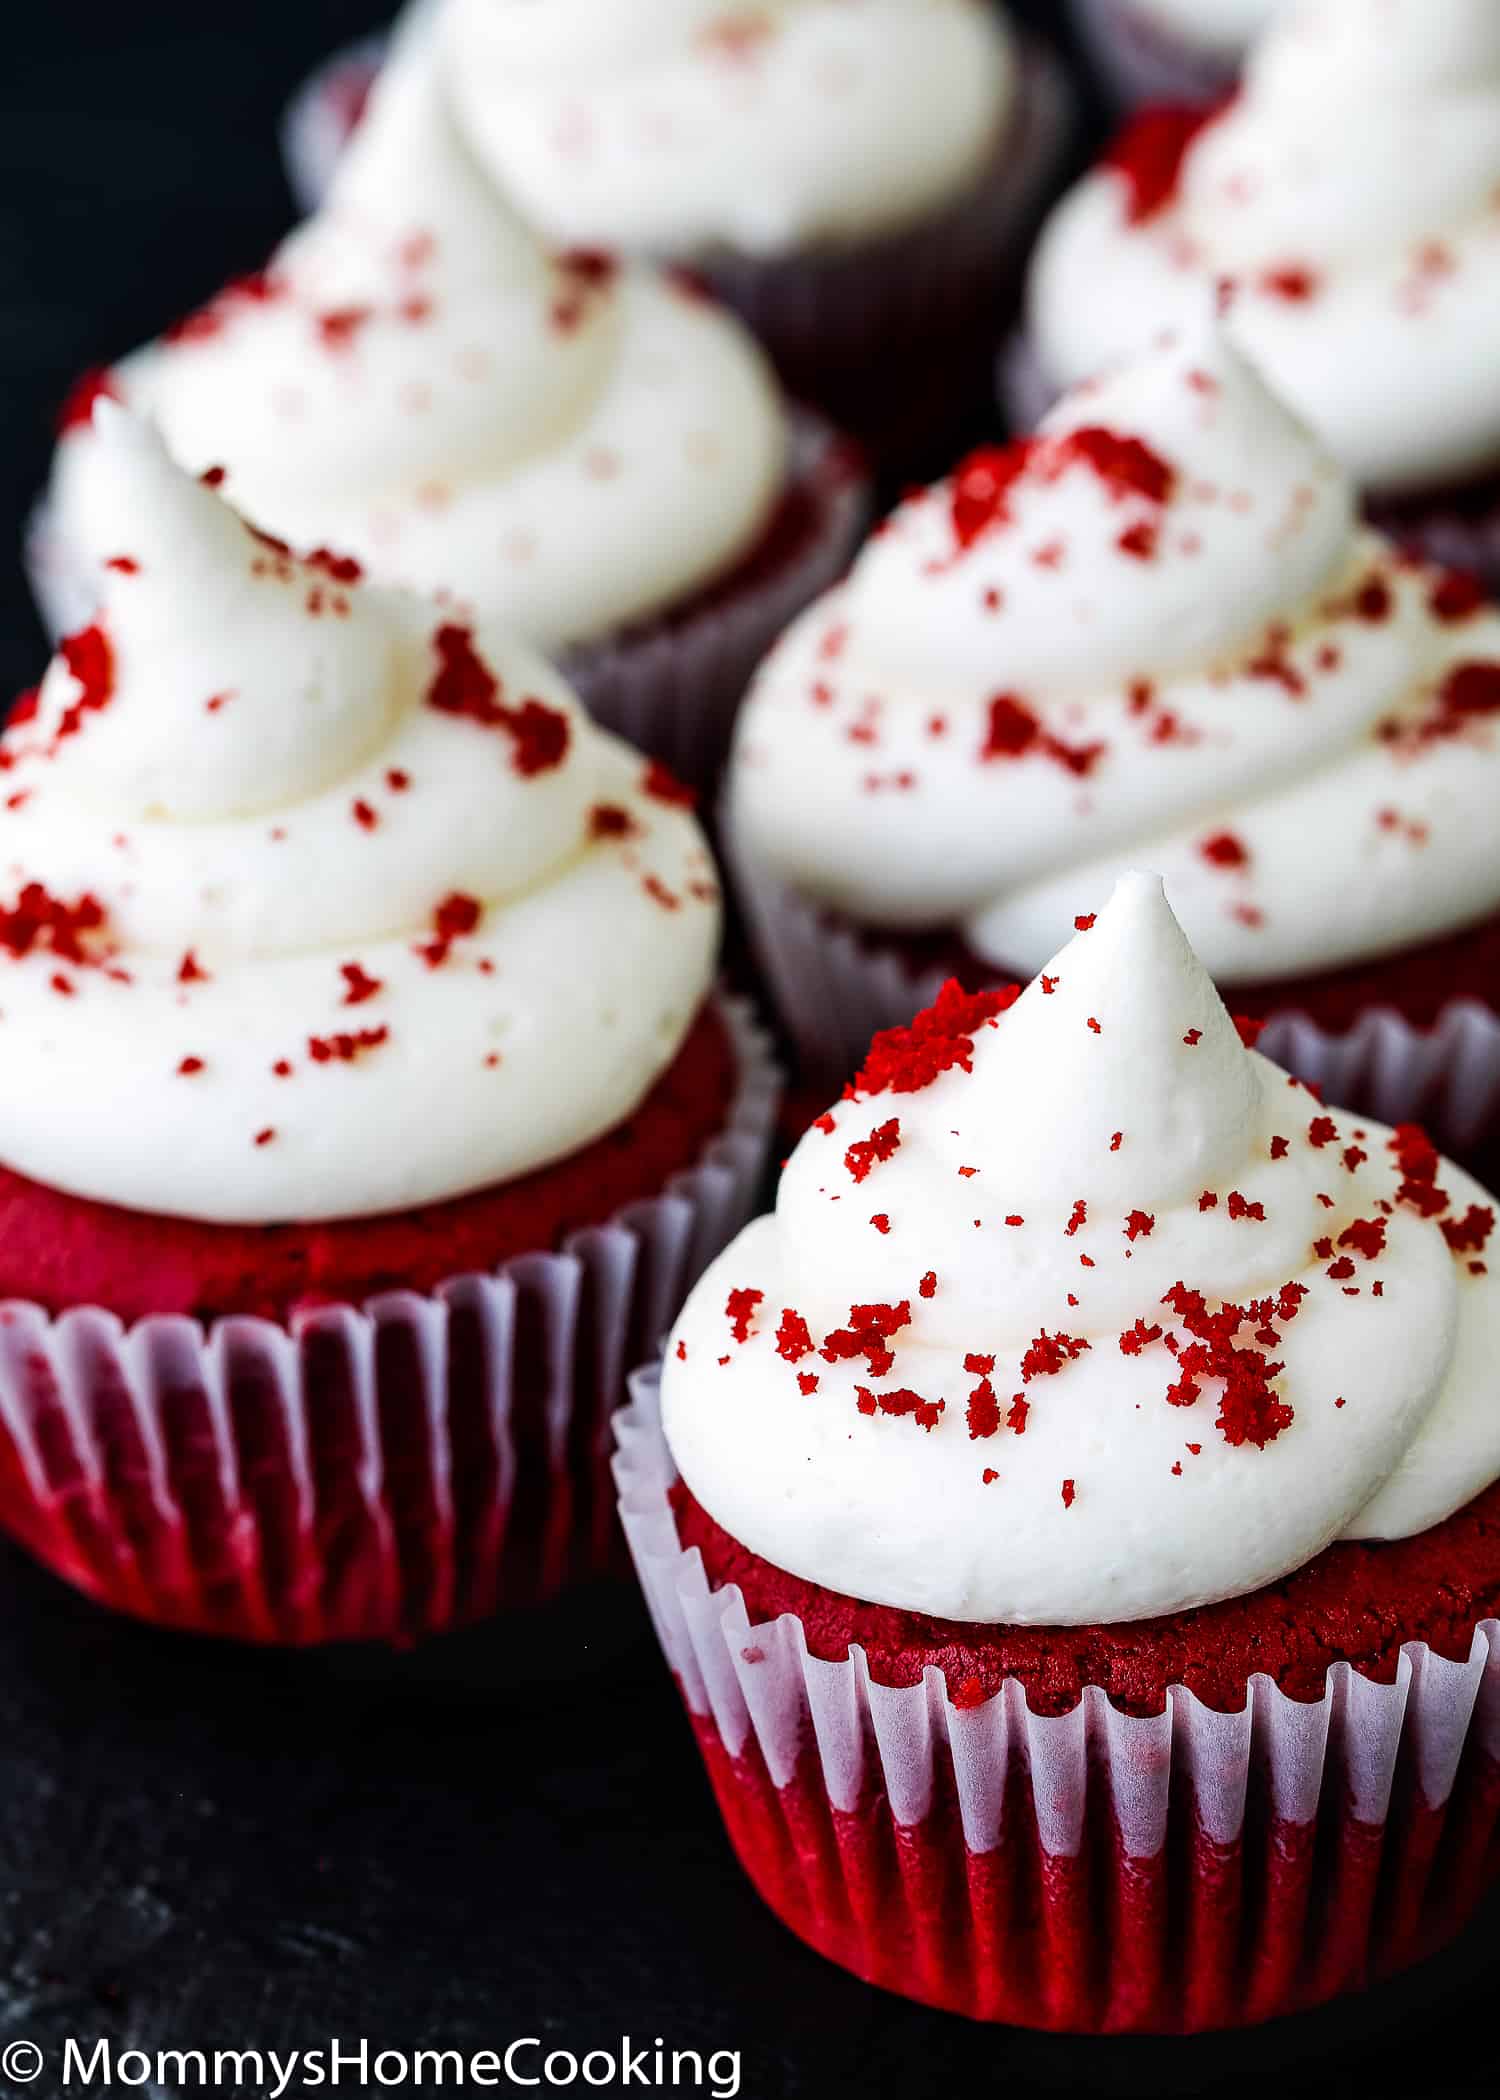 Egg-free red velvet cupcakes with frosting over a black surface.